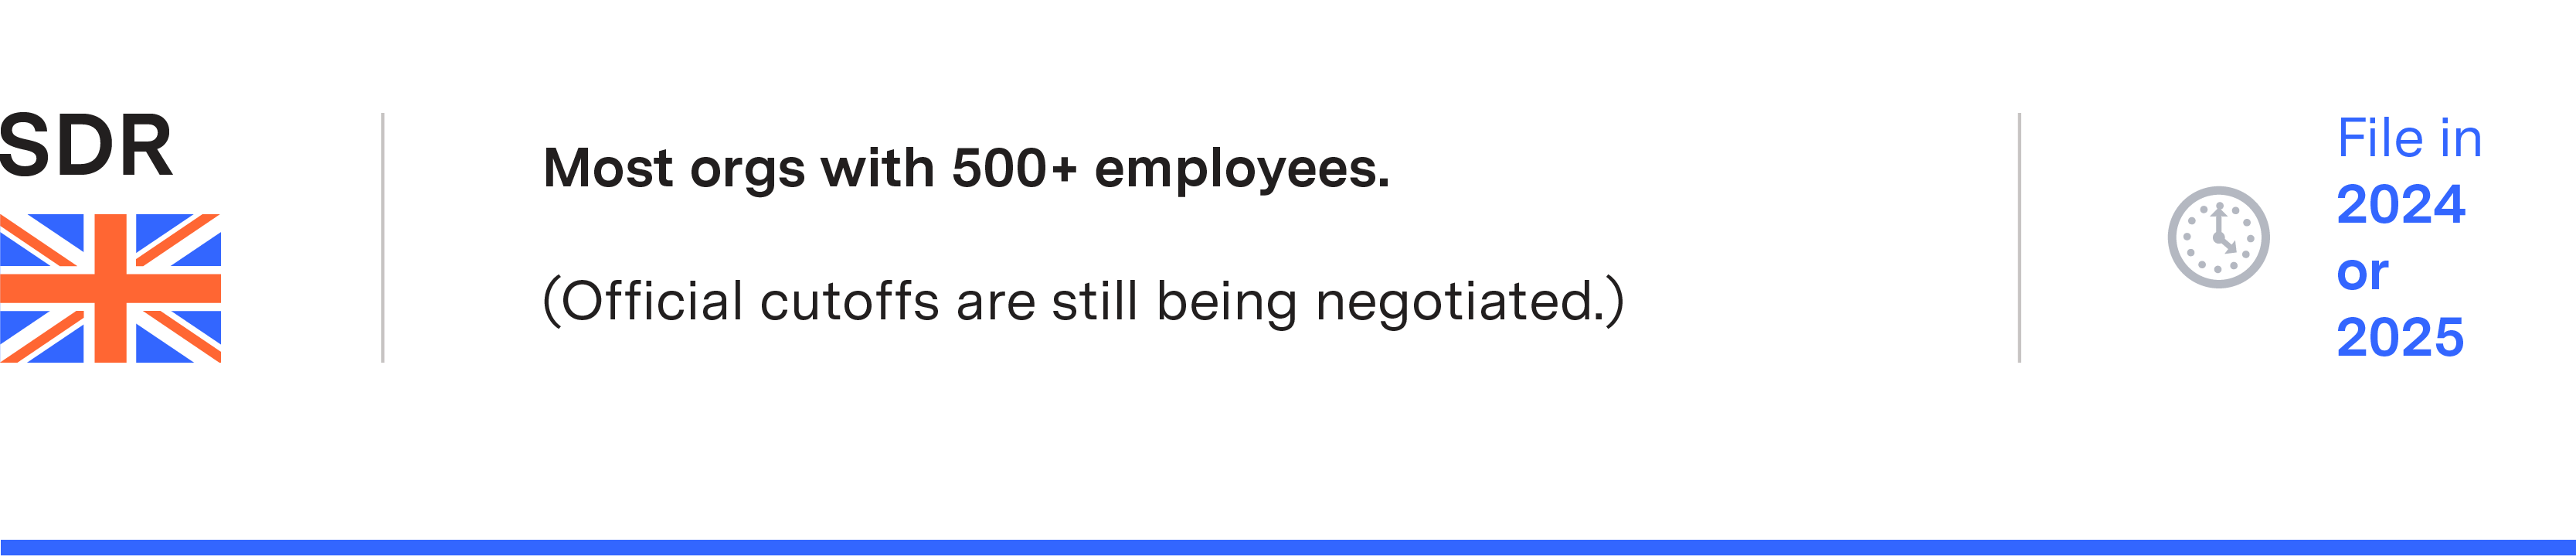 SDR requirement: Most orgs with 500+ employees. File in 2023 or 2024.